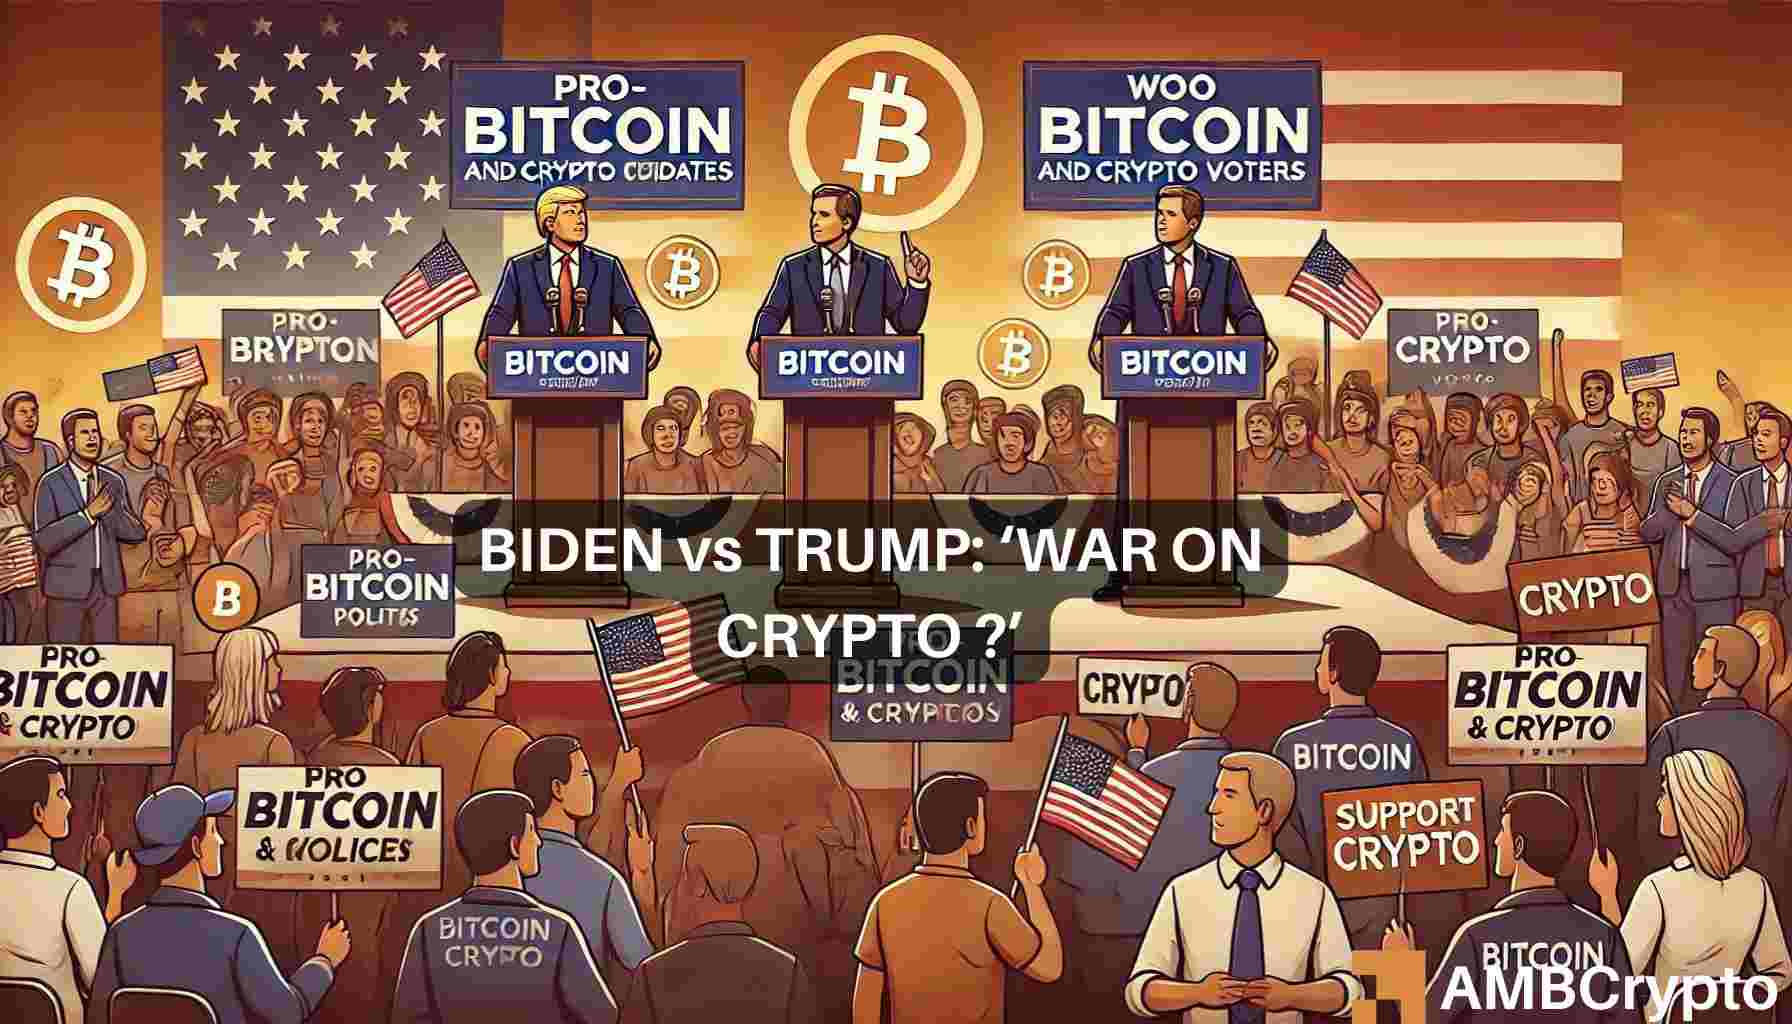 Trump takes aim at Biden’s ‘war on crypto’ – Here’s what’s happening